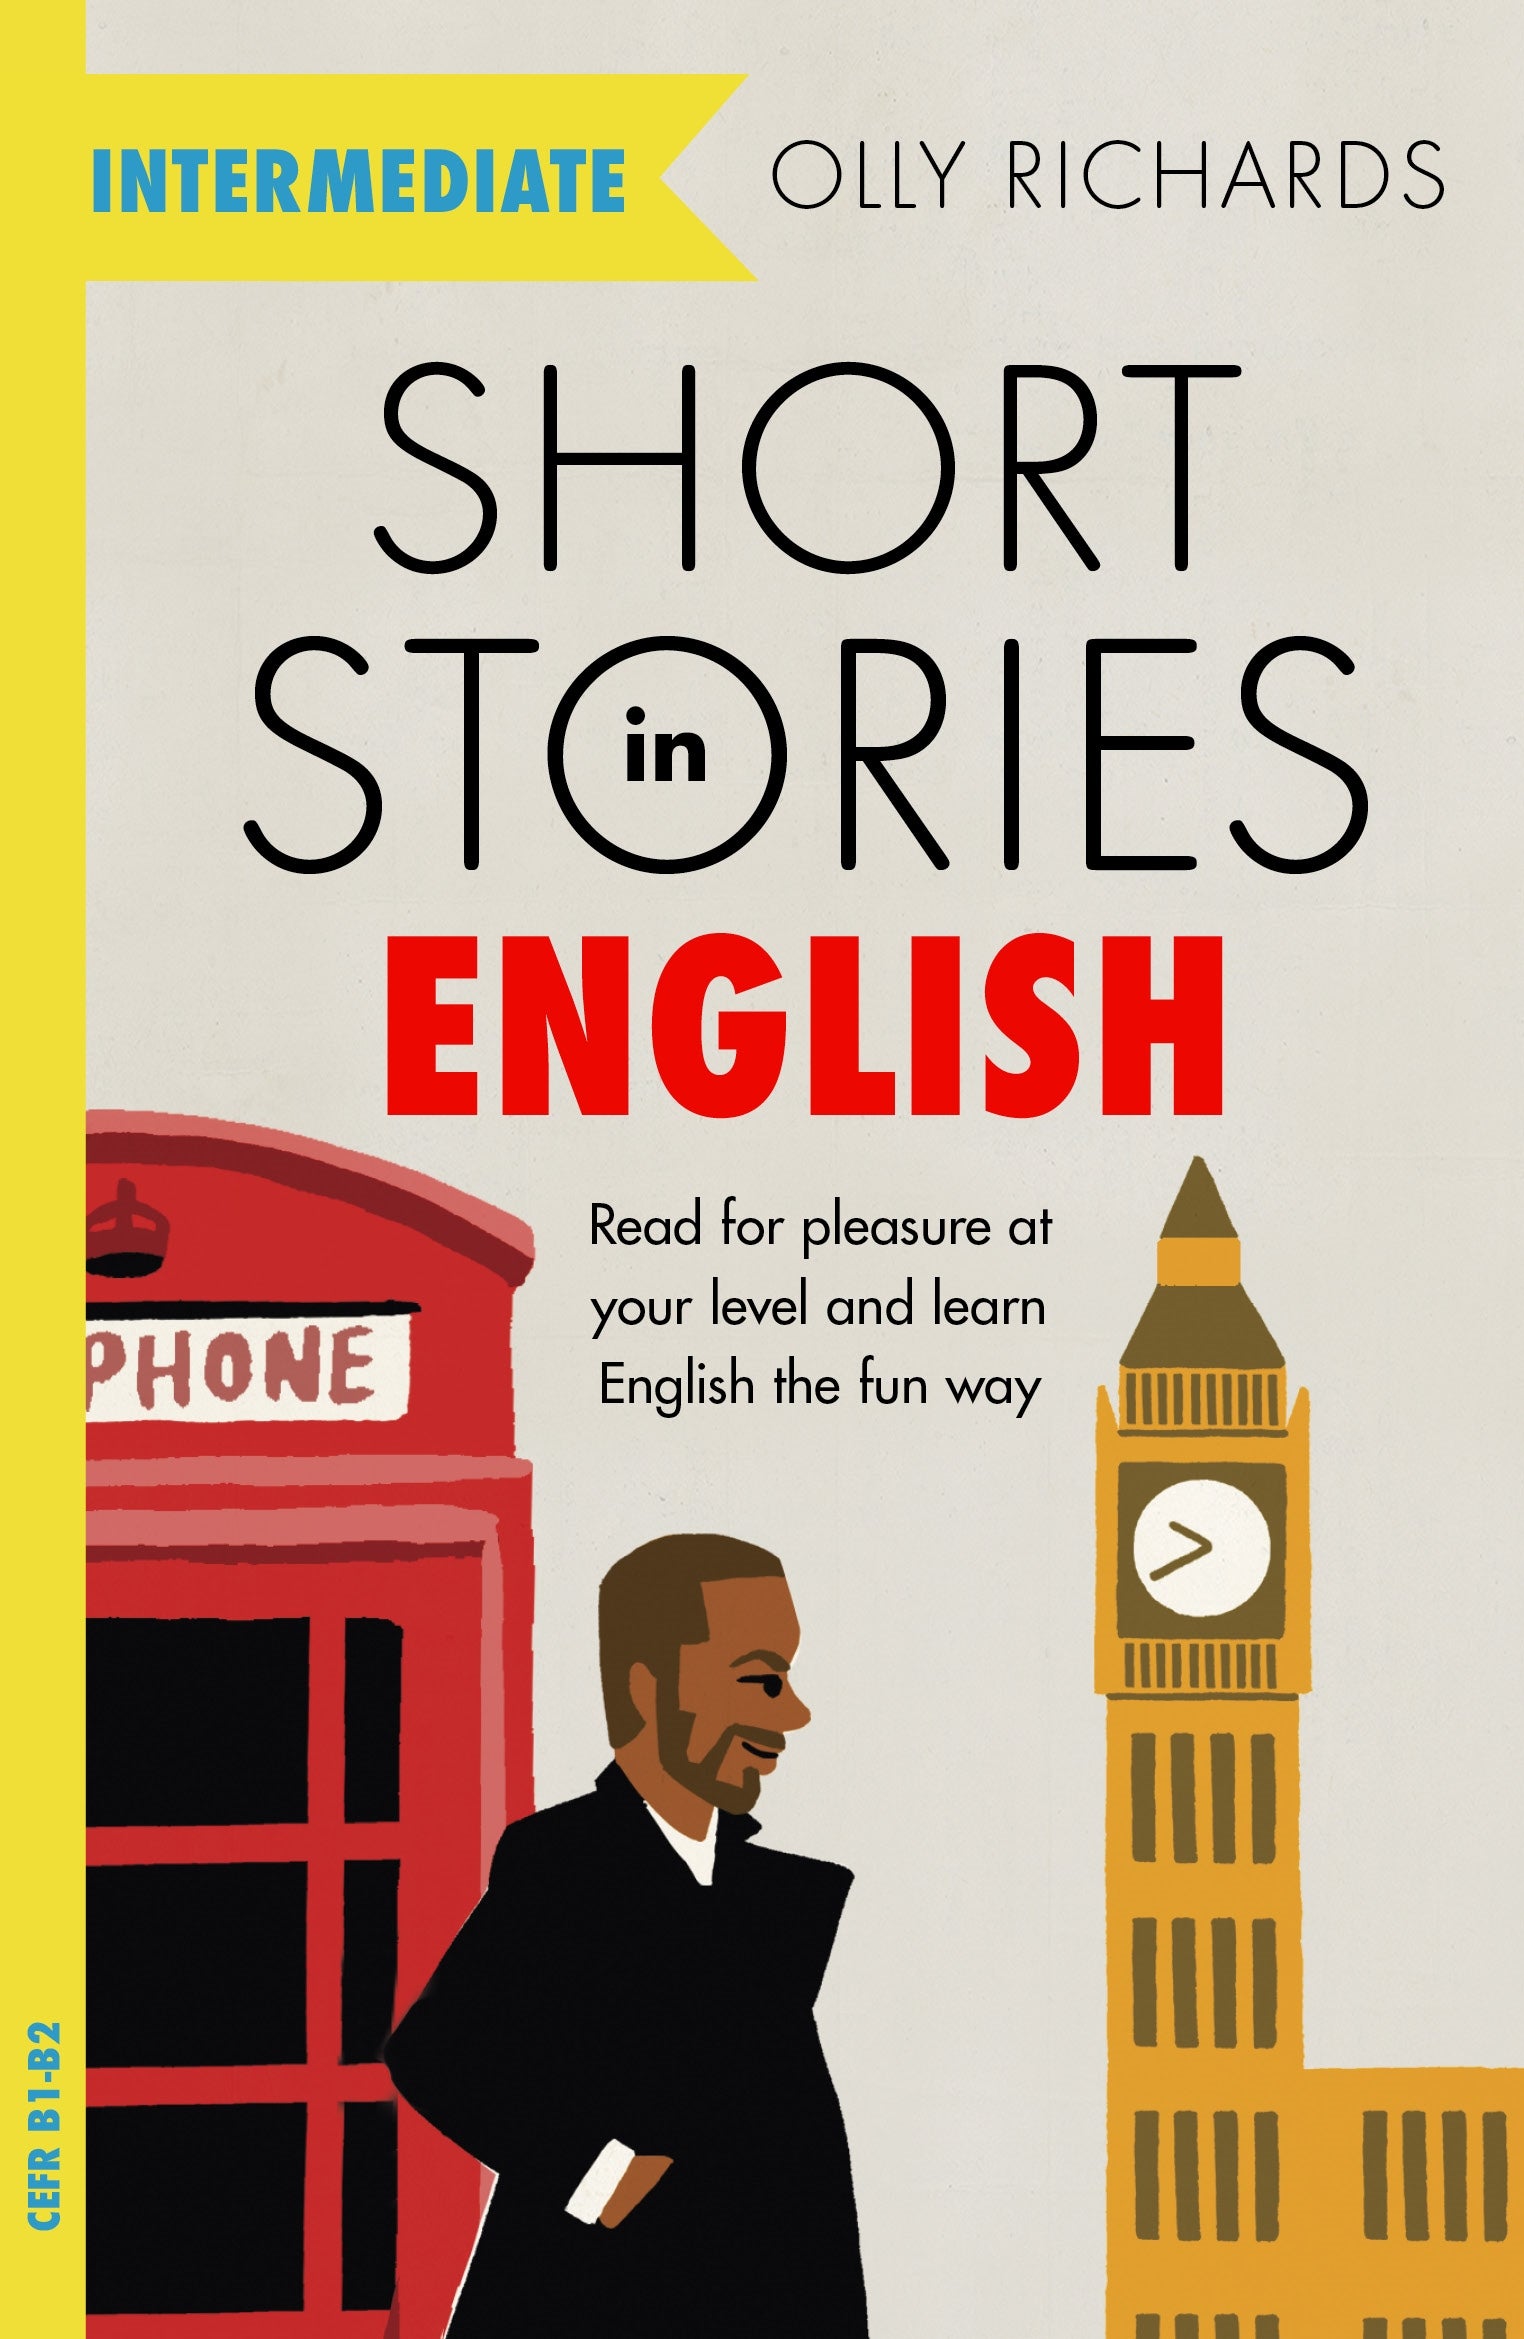 Short Stories in English  for Intermediate Learners by Olly Richards